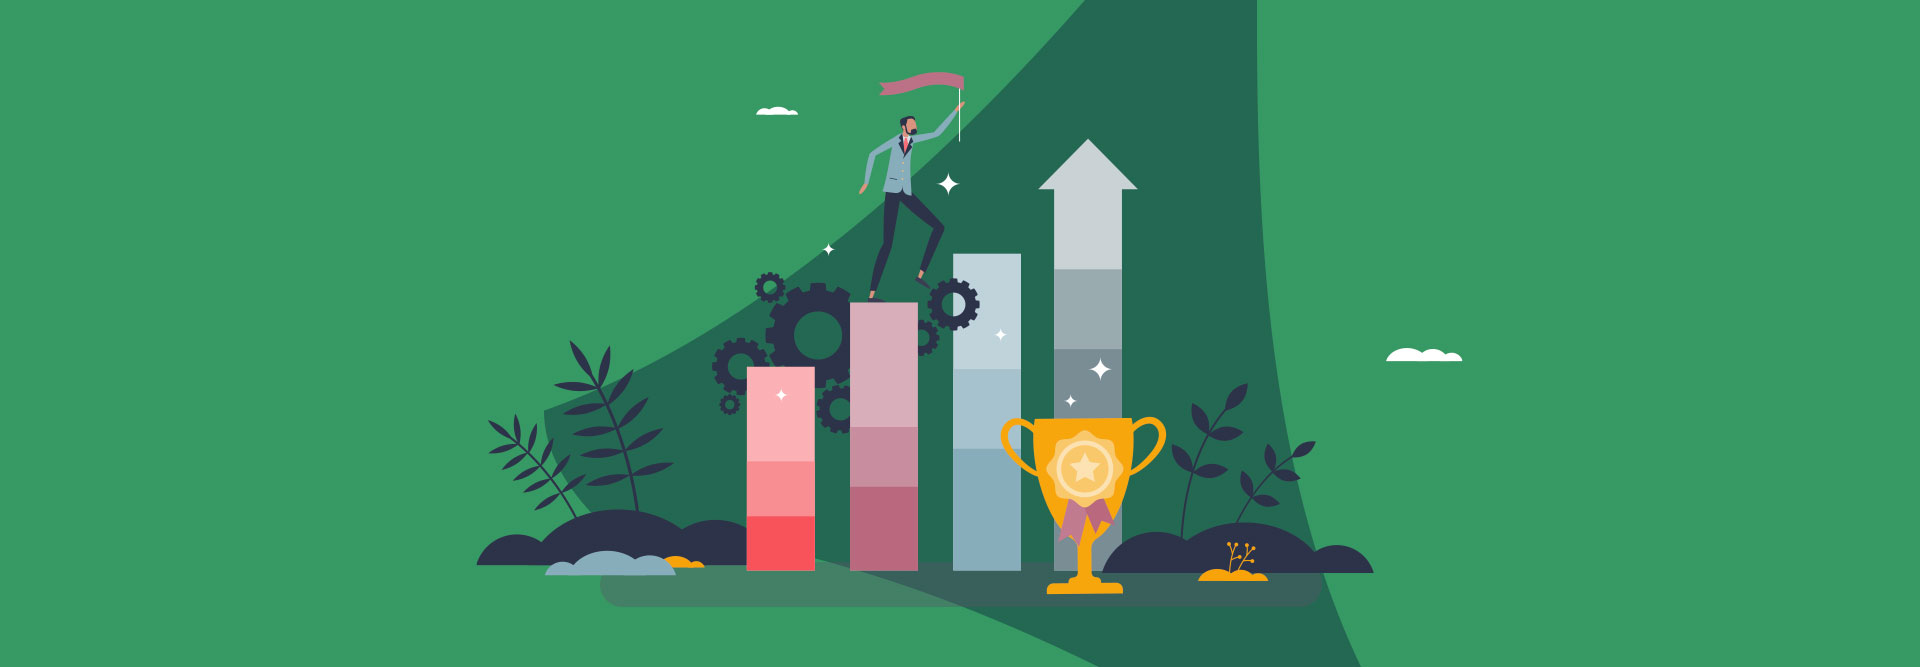 Businessman climbing bar chart with trophy, symbolizing success in making money in digital marketing